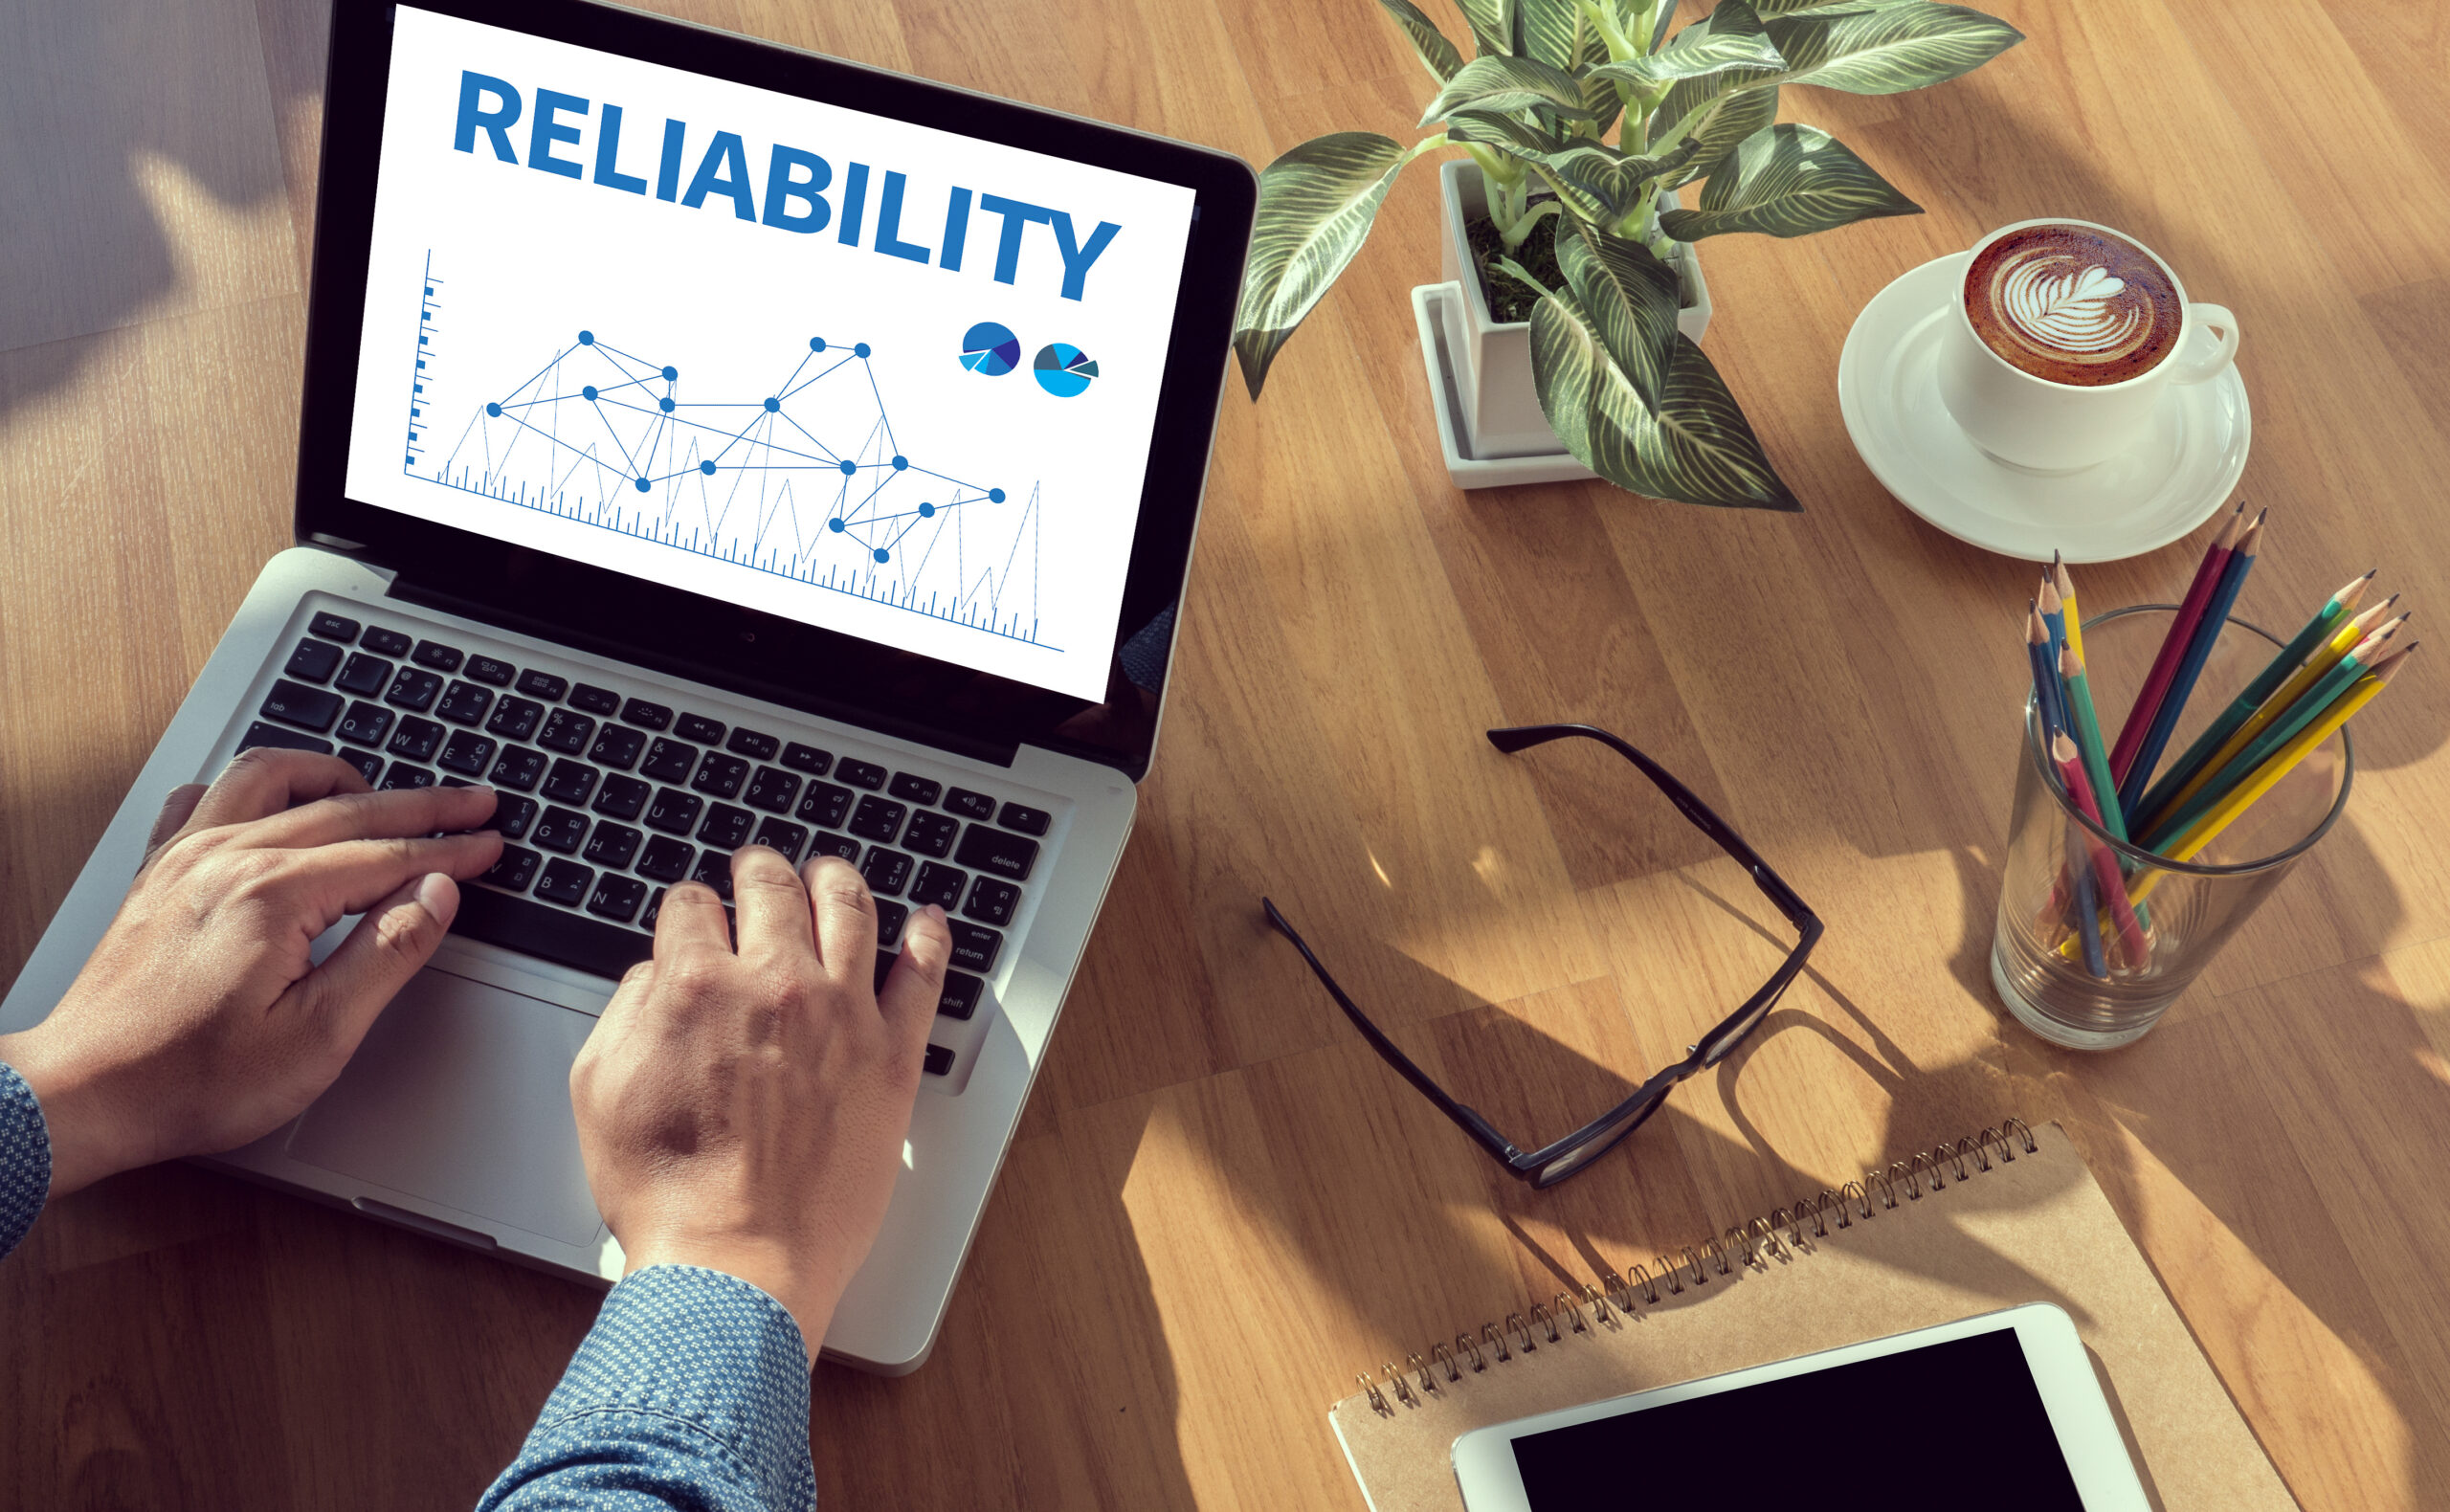 A laptop with a graph and the heading ‘Reliability’ written on it on an office desk referring to how reliability needs to be measured or evaluated.